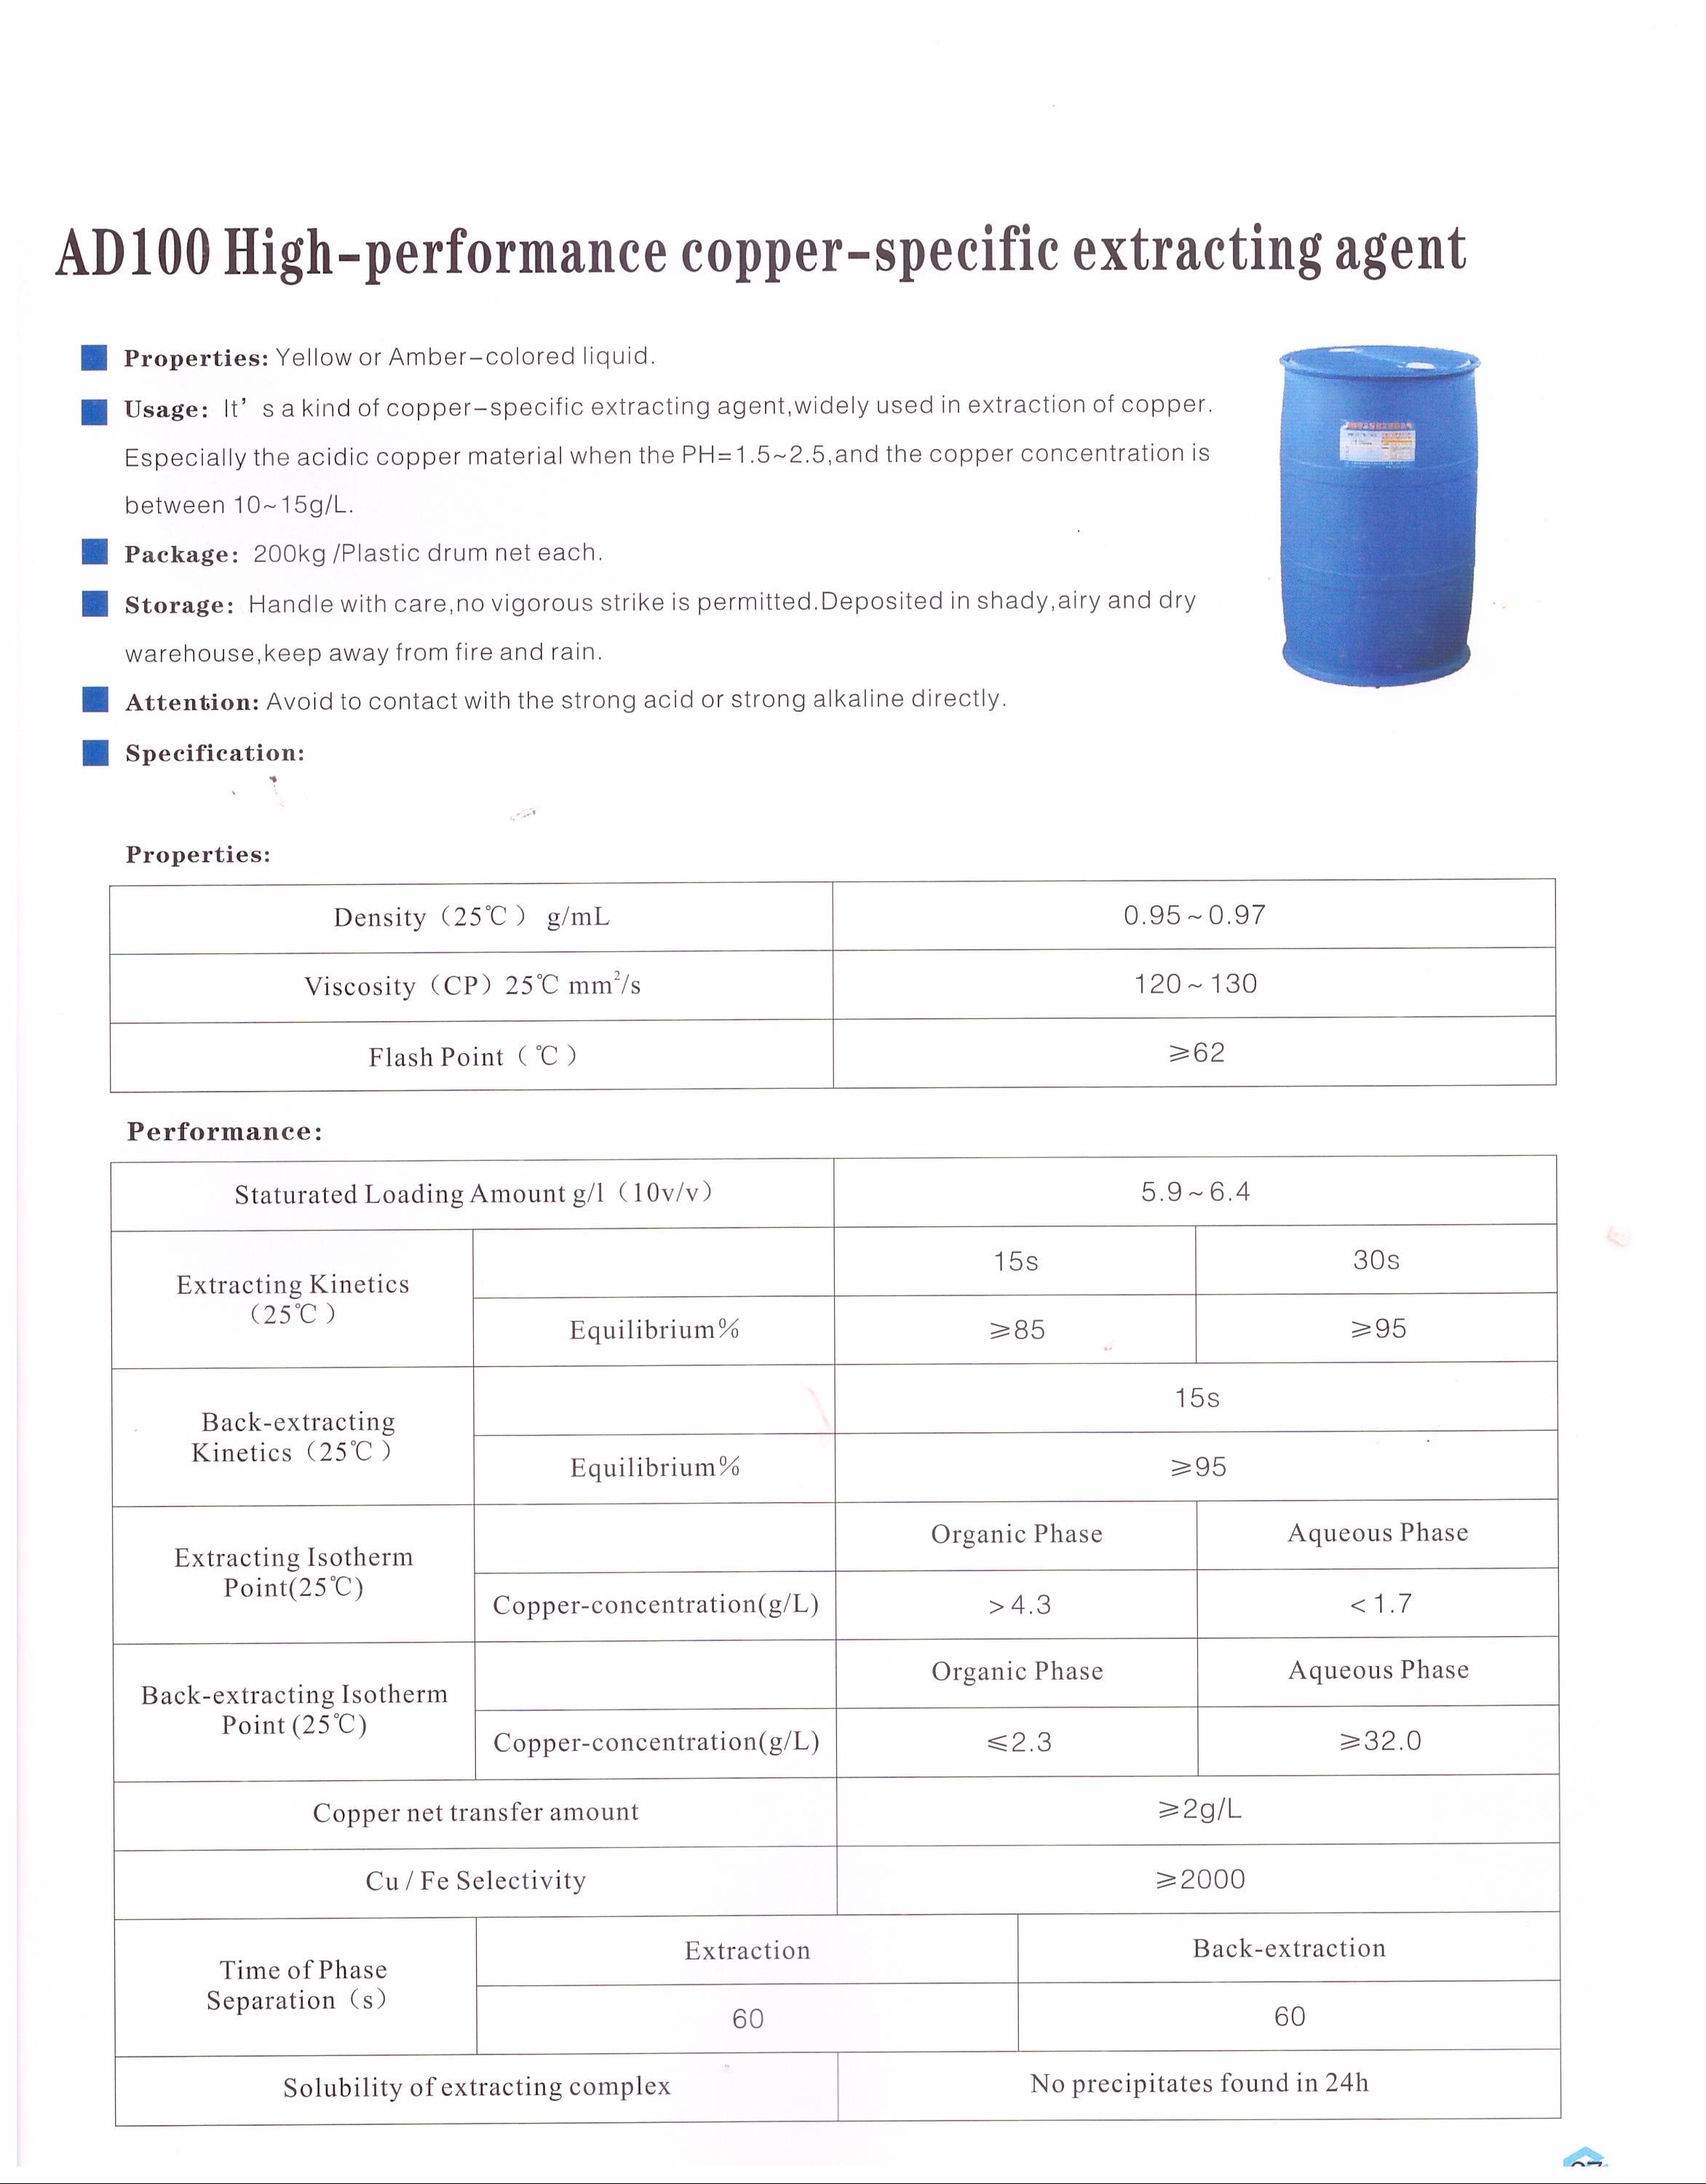 AD100 High-performance copper-specific extracting agent.jpg